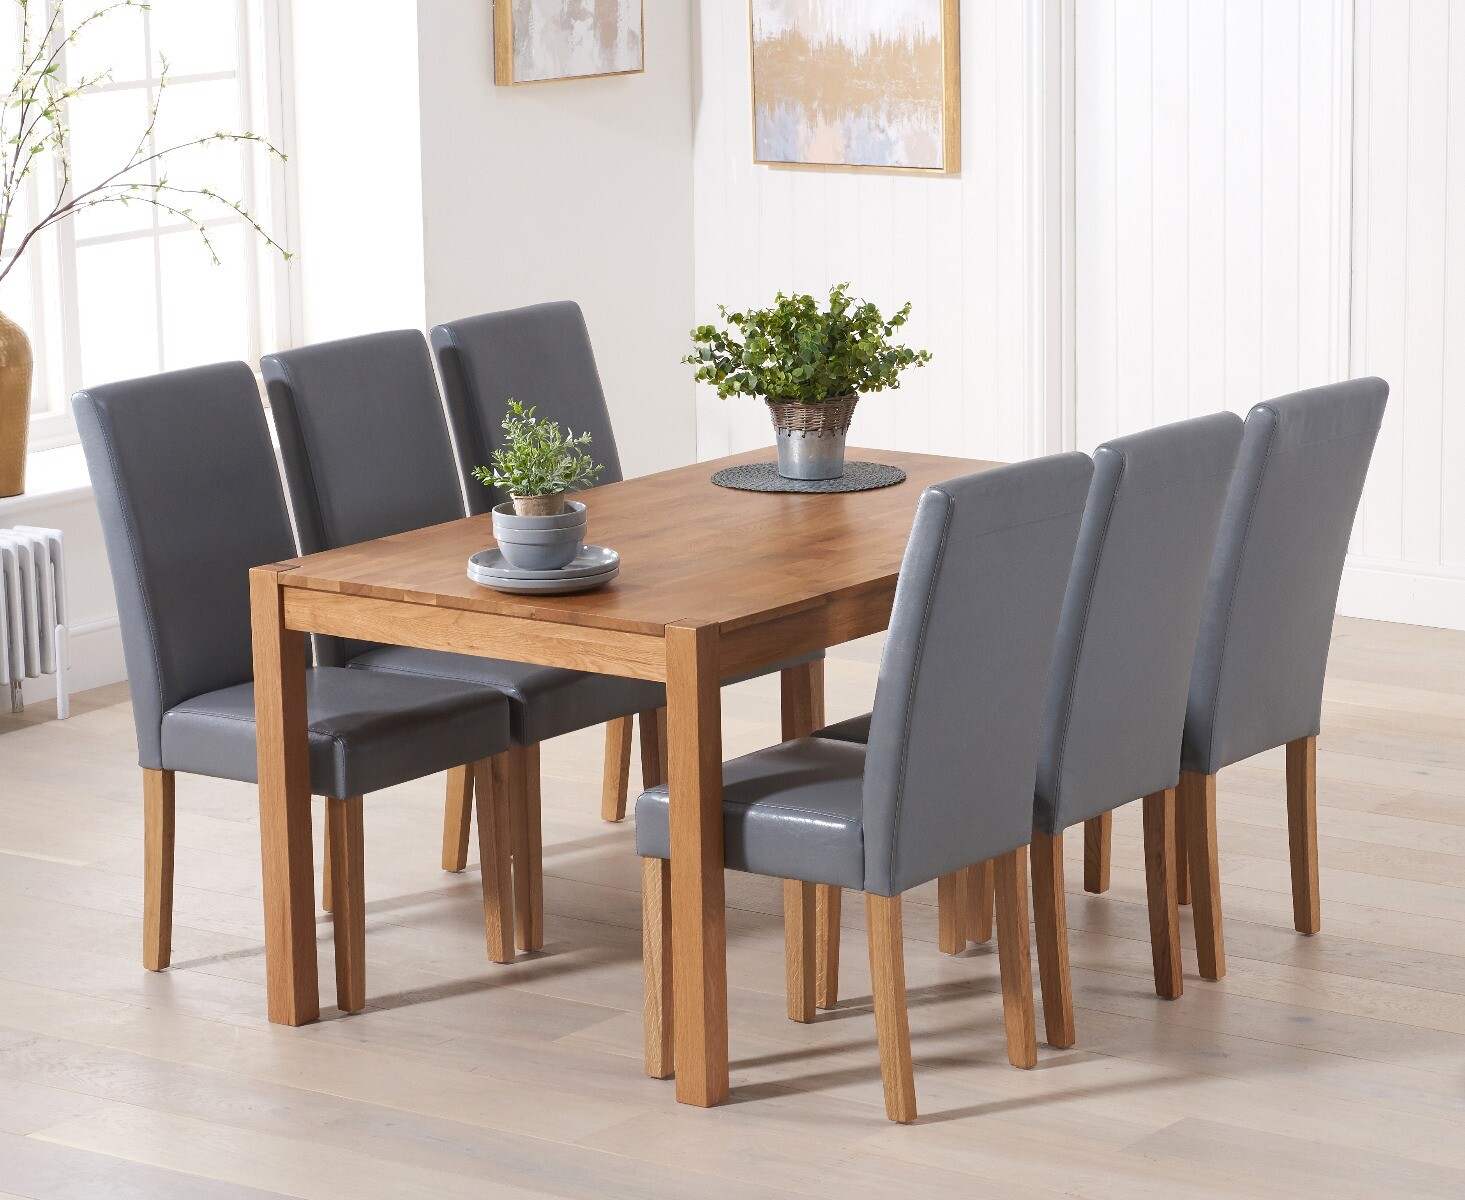 York 150cm Solid Oak Dining Table With 8 Cream Olivia Chairs